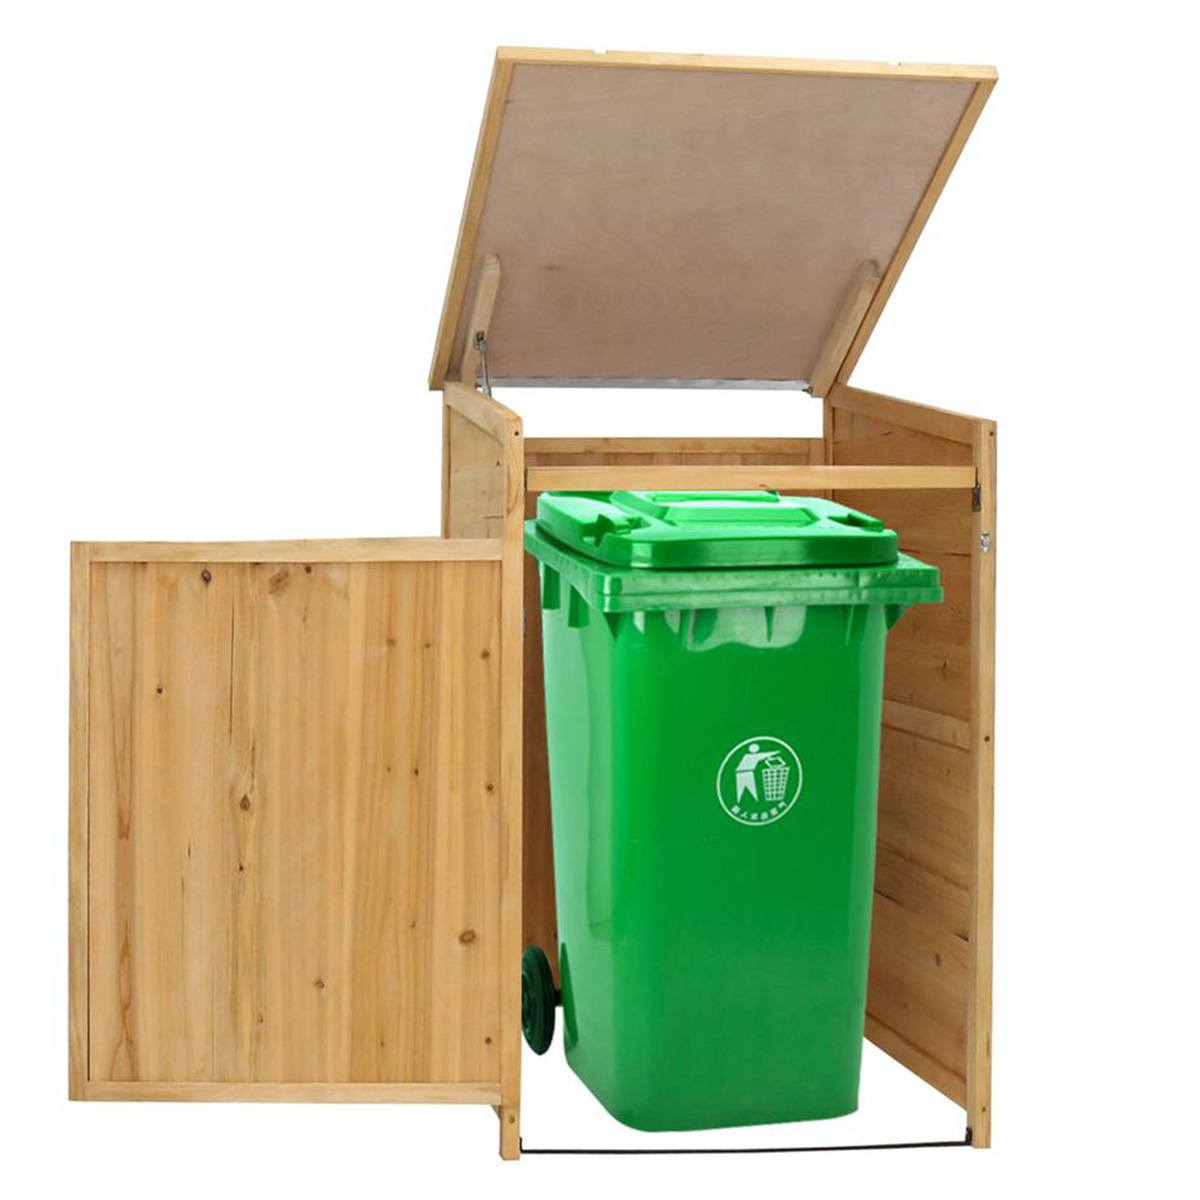 9 Ways To Disguise Your Trash Bin, Diy Outdoor Garbage Can Cabinet